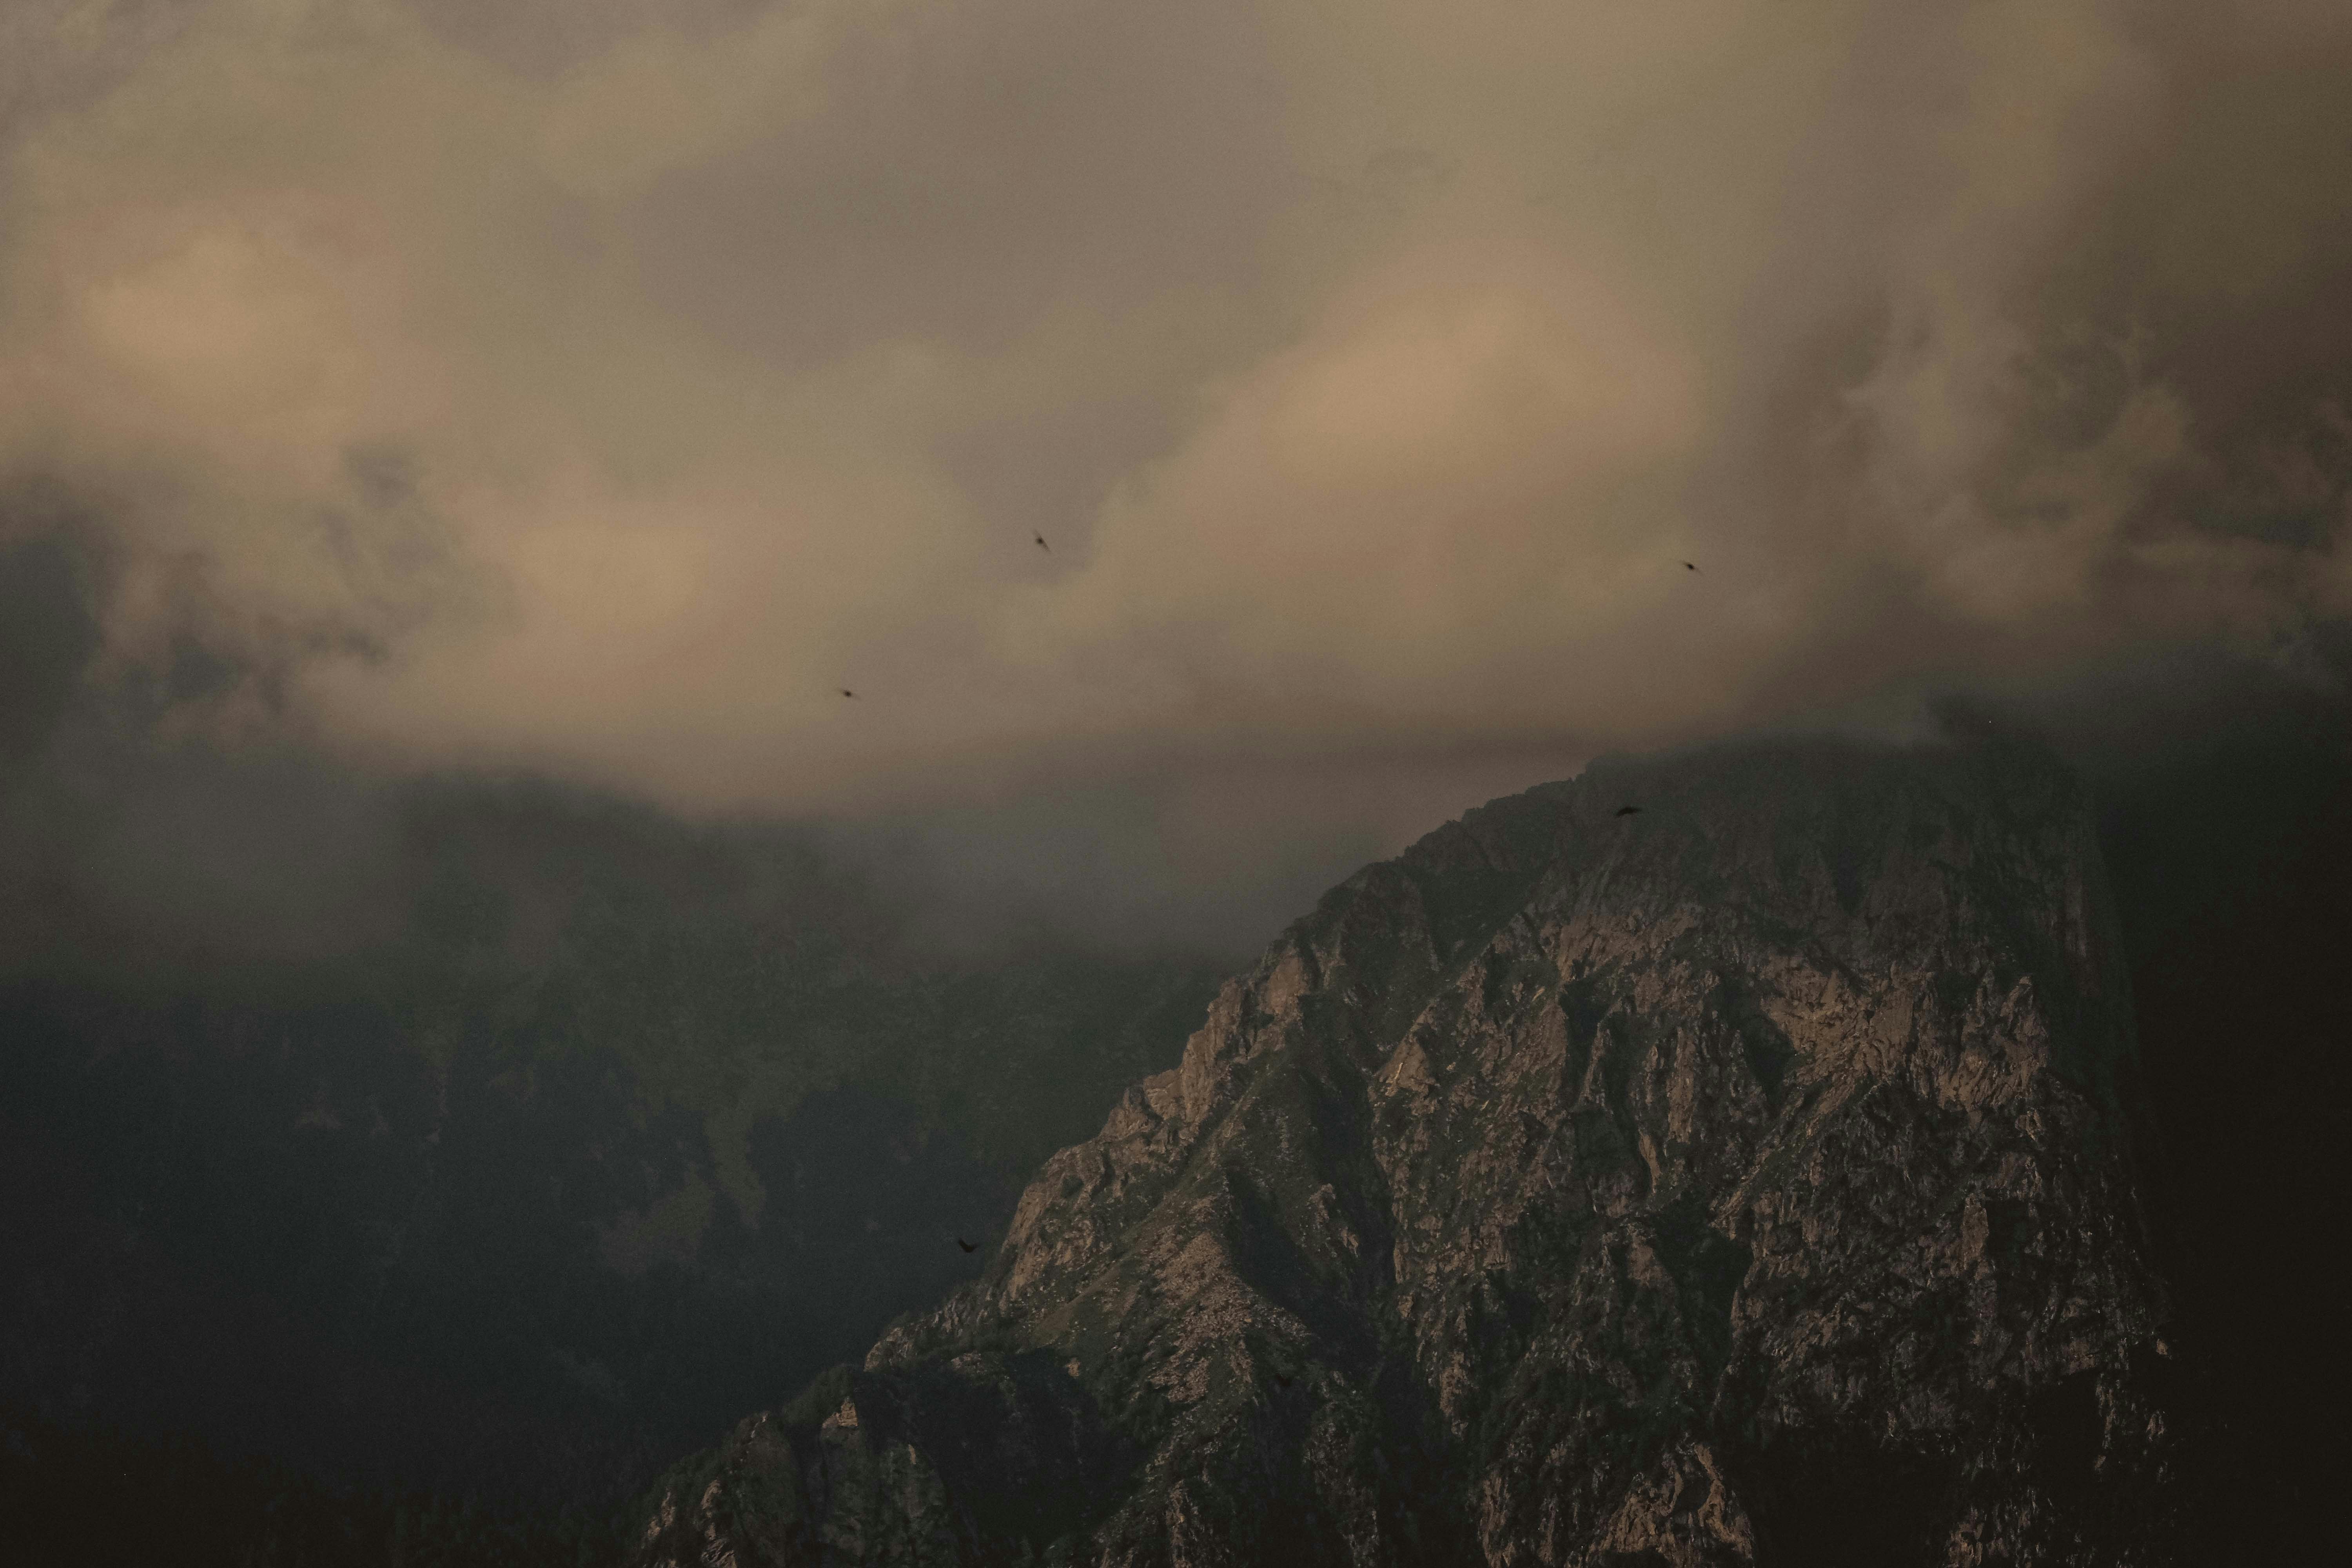 birds flying over the mountains during daytime